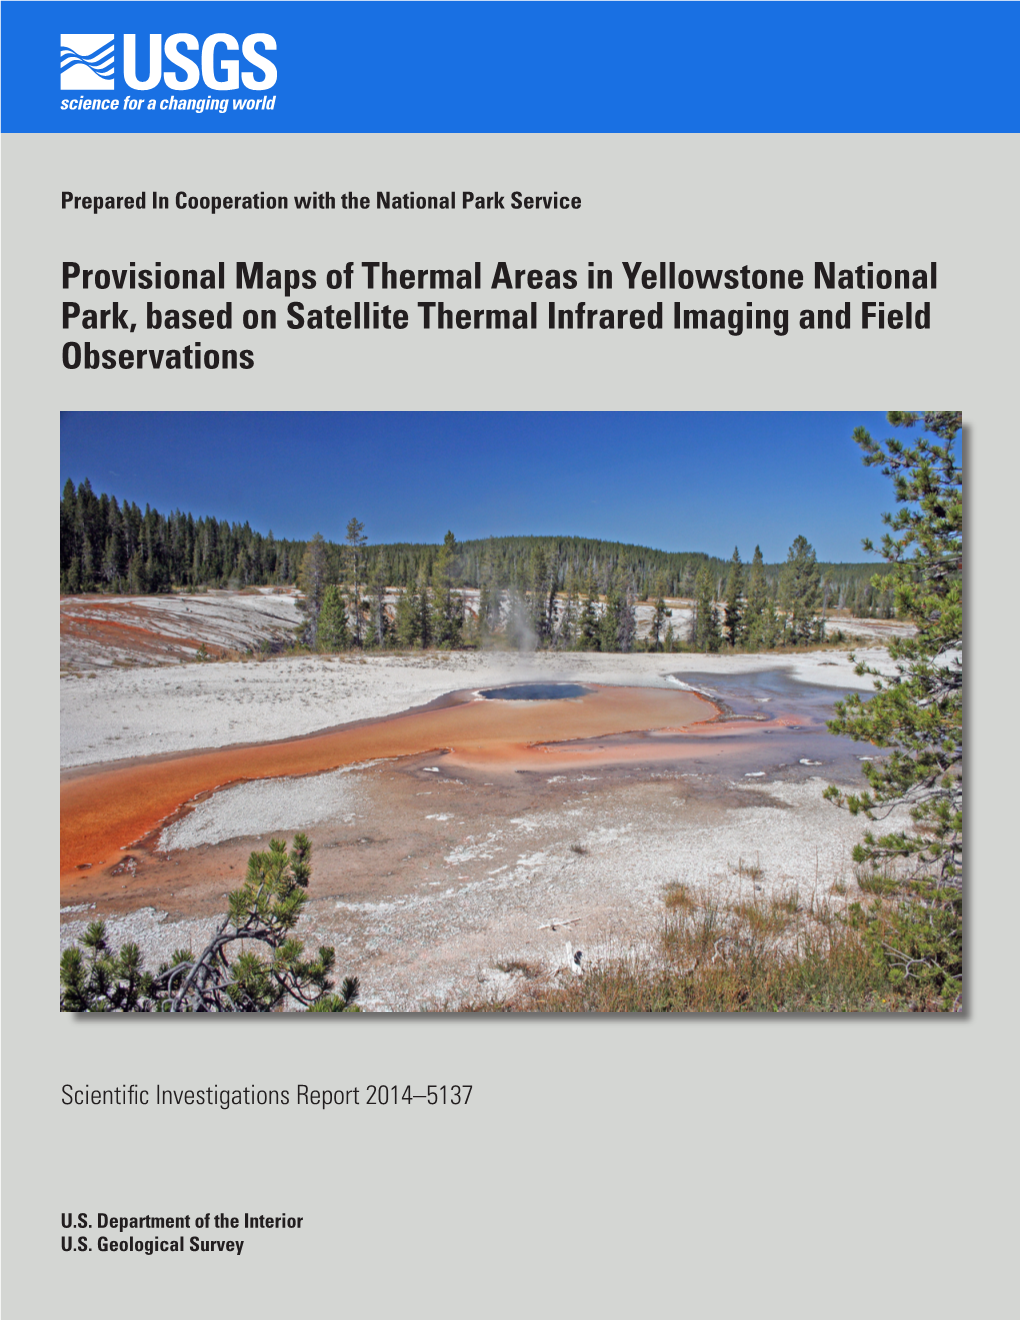 Provisional Maps of Thermal Areas in Yellowstone National Park, Based on Satellite Thermal Infrared Imaging and Field Observations